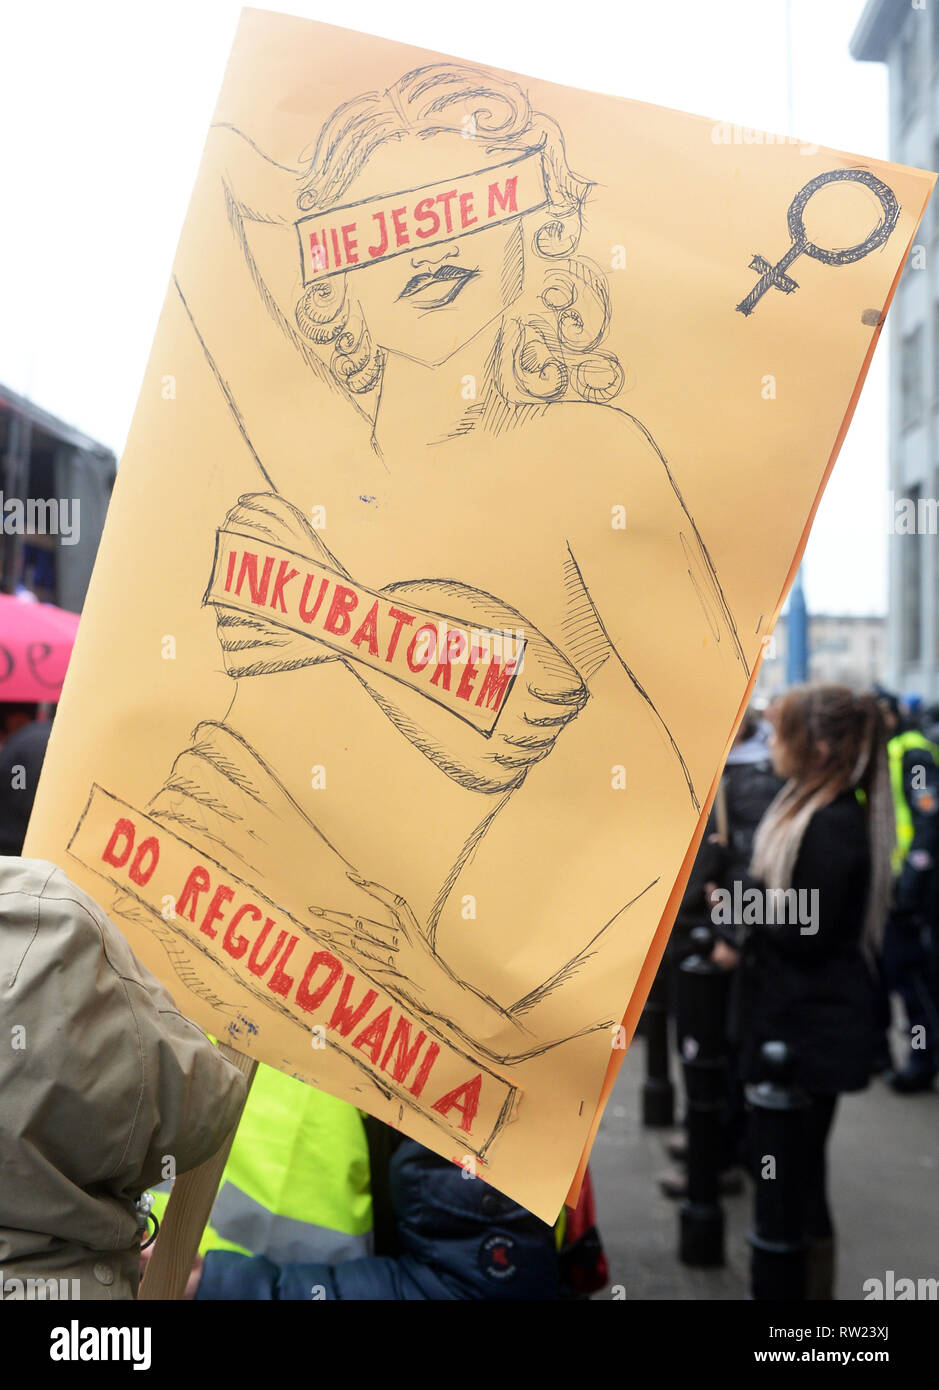 20th Manifa organised by Porozumienie Kobiet 8 Marca, an informal and independent group demanding the equalization for women and correction of Polish law discriminating women, entitled We’re the revolution - 'The law protects the perpetrators', 'We are afraid to ask for help' walks through the streets on March 3, 2019 in Warsaw, Poland.  The poster reads: I'm not an incubator to be adjust. Stock Photo